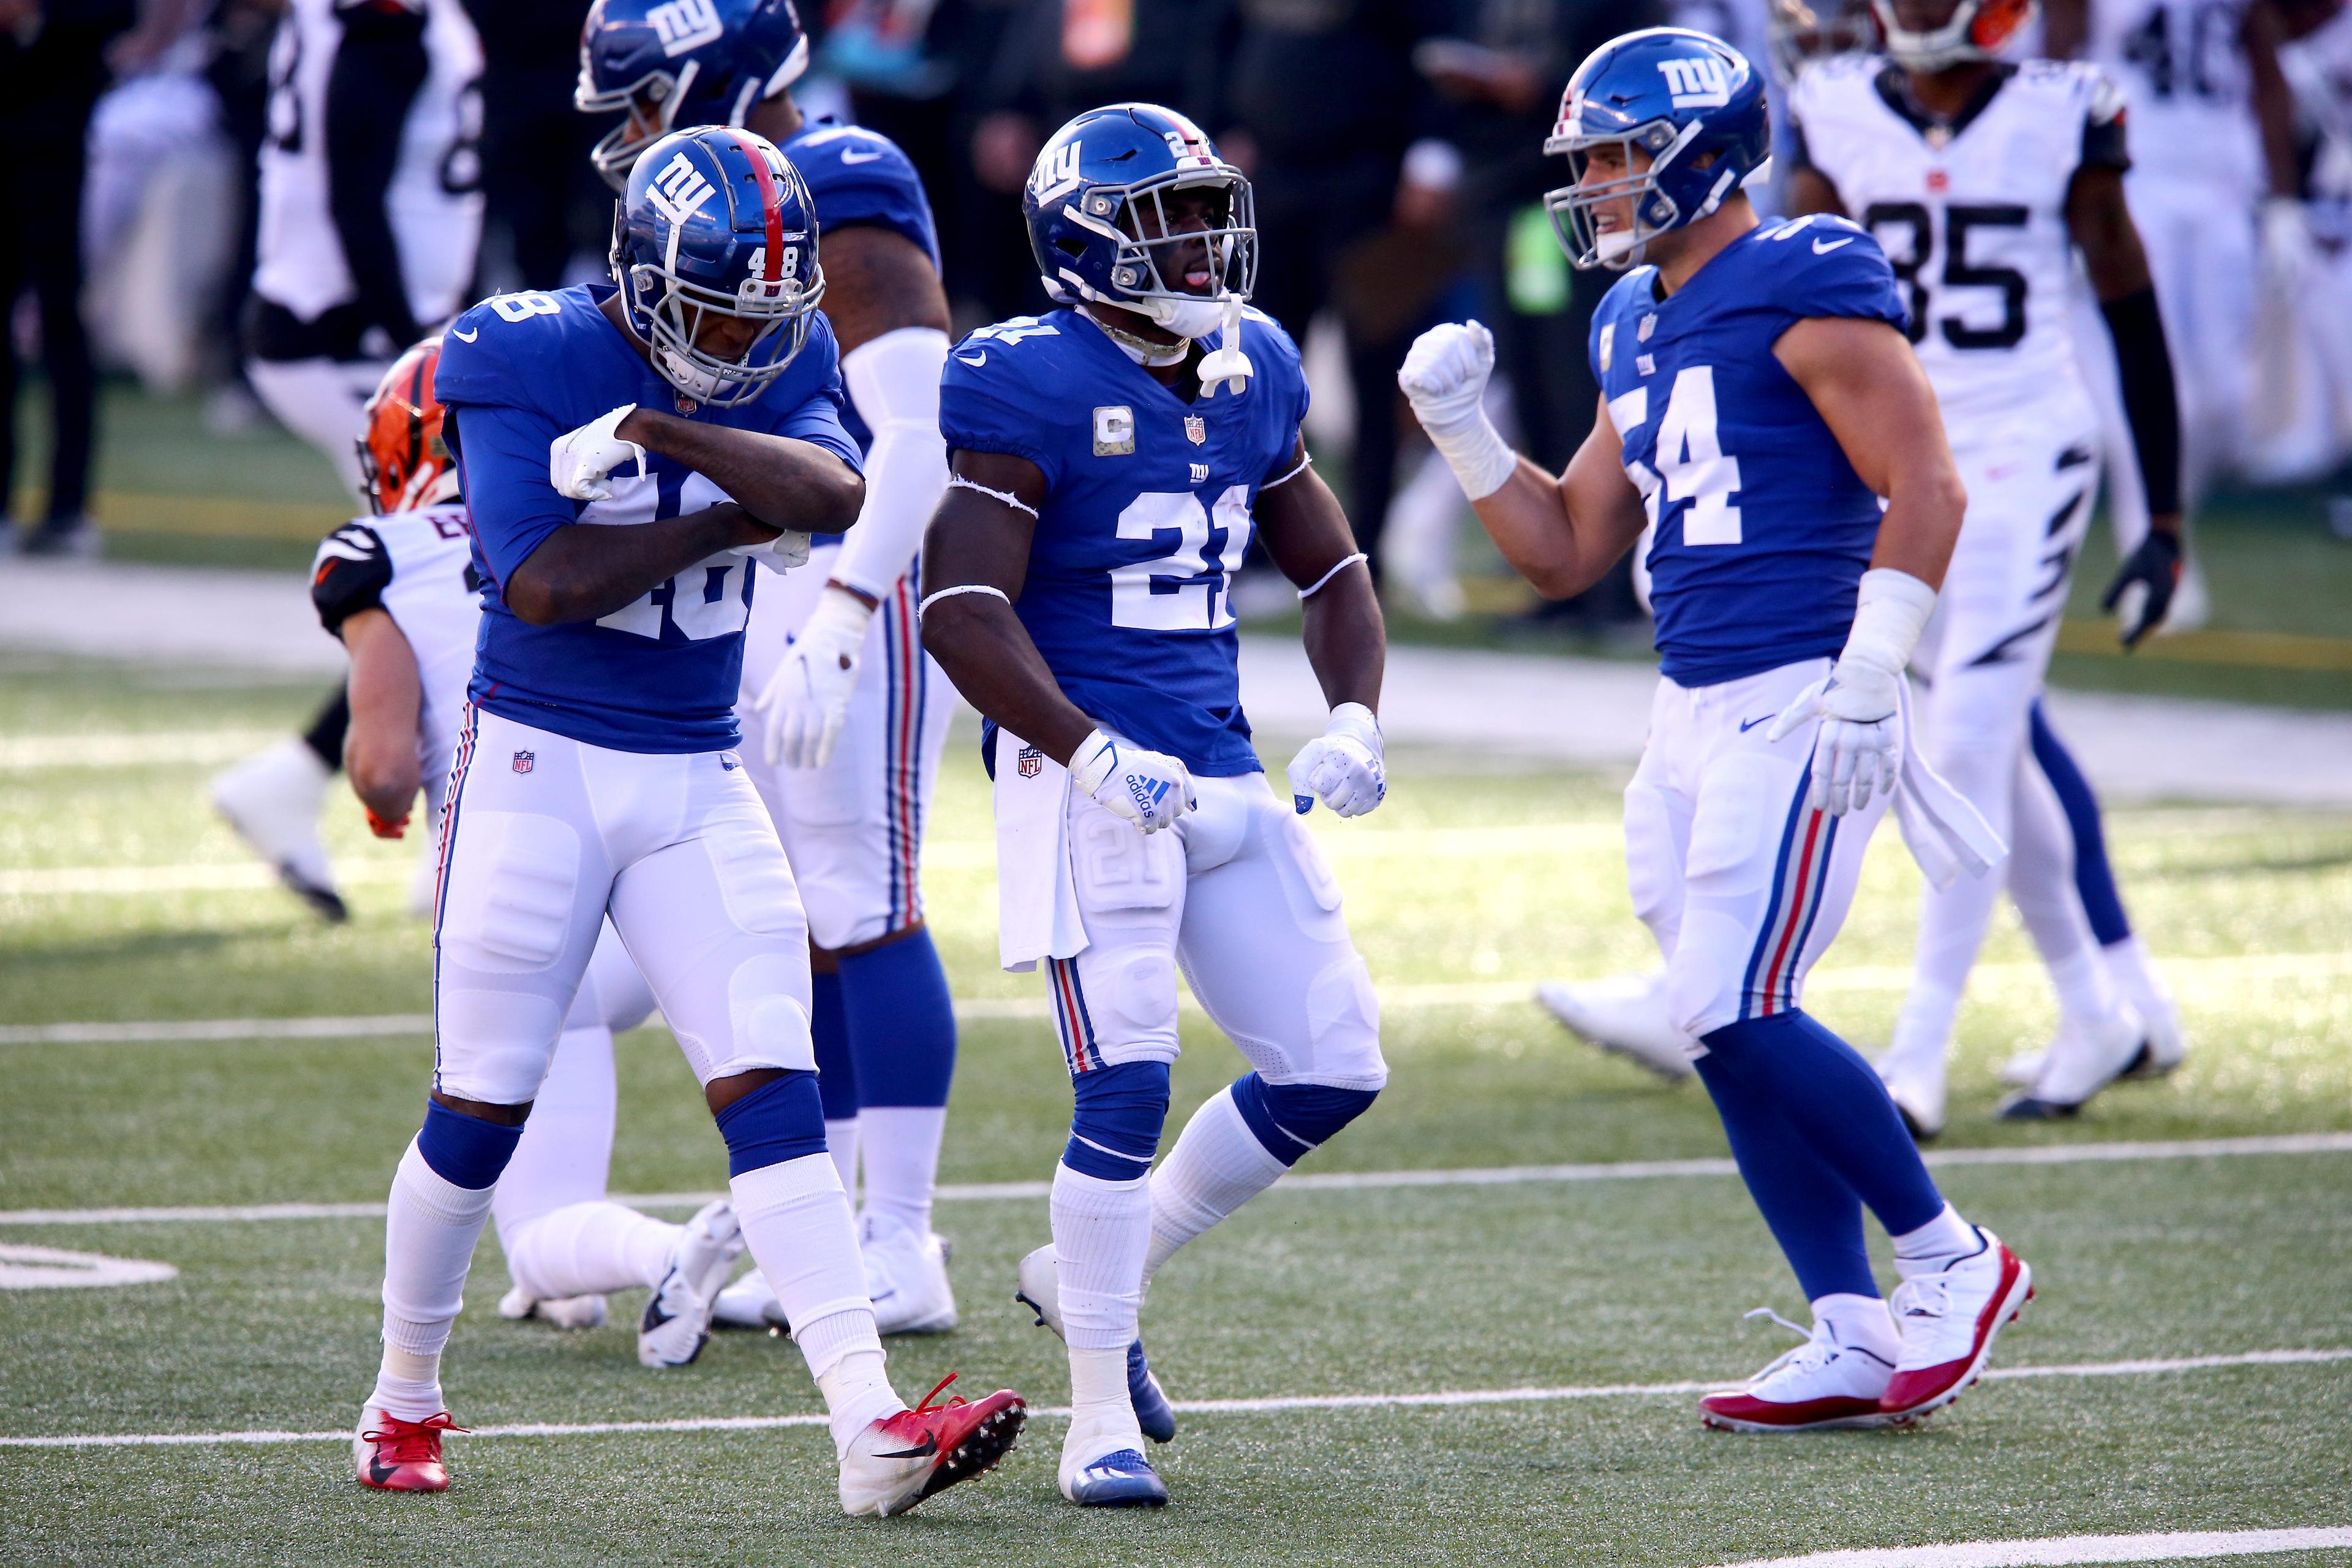 Jabrill Peppers and the Giants' defense / Kareem Elgazzar/The Enquirer via Imagn Content Services, LLC